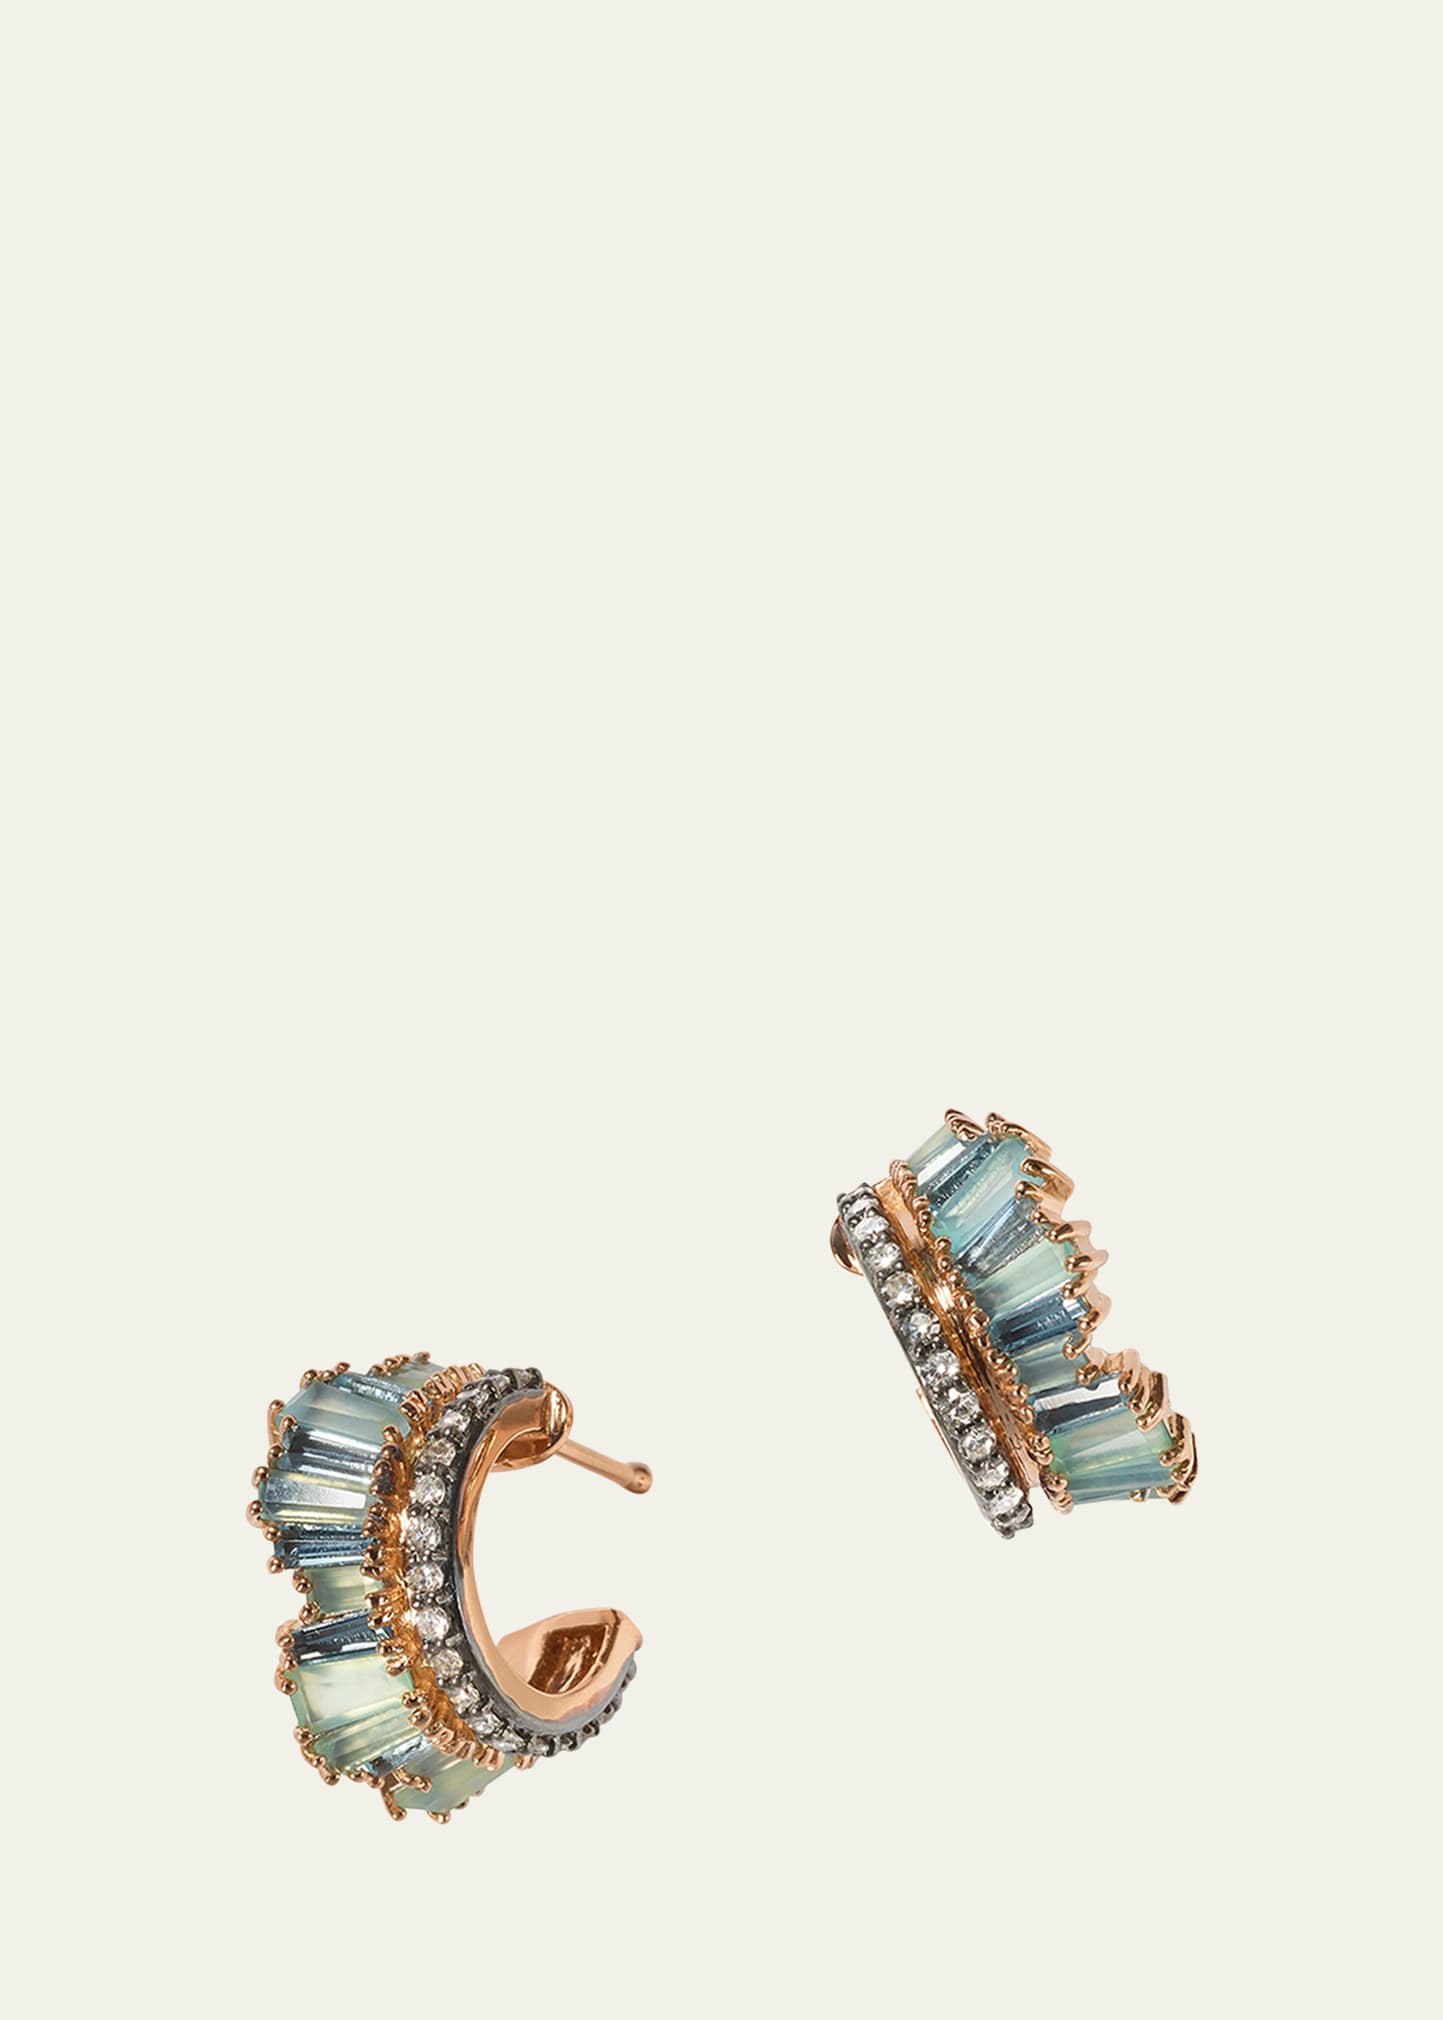 NAK ARMSTRONG 20K RECYCLED ROSE GOLD PETITE RUCHED HOOP EARRINGS WITH BLUE PERUVIAN OPAL, AQUAMARINE AND WHITE DIA